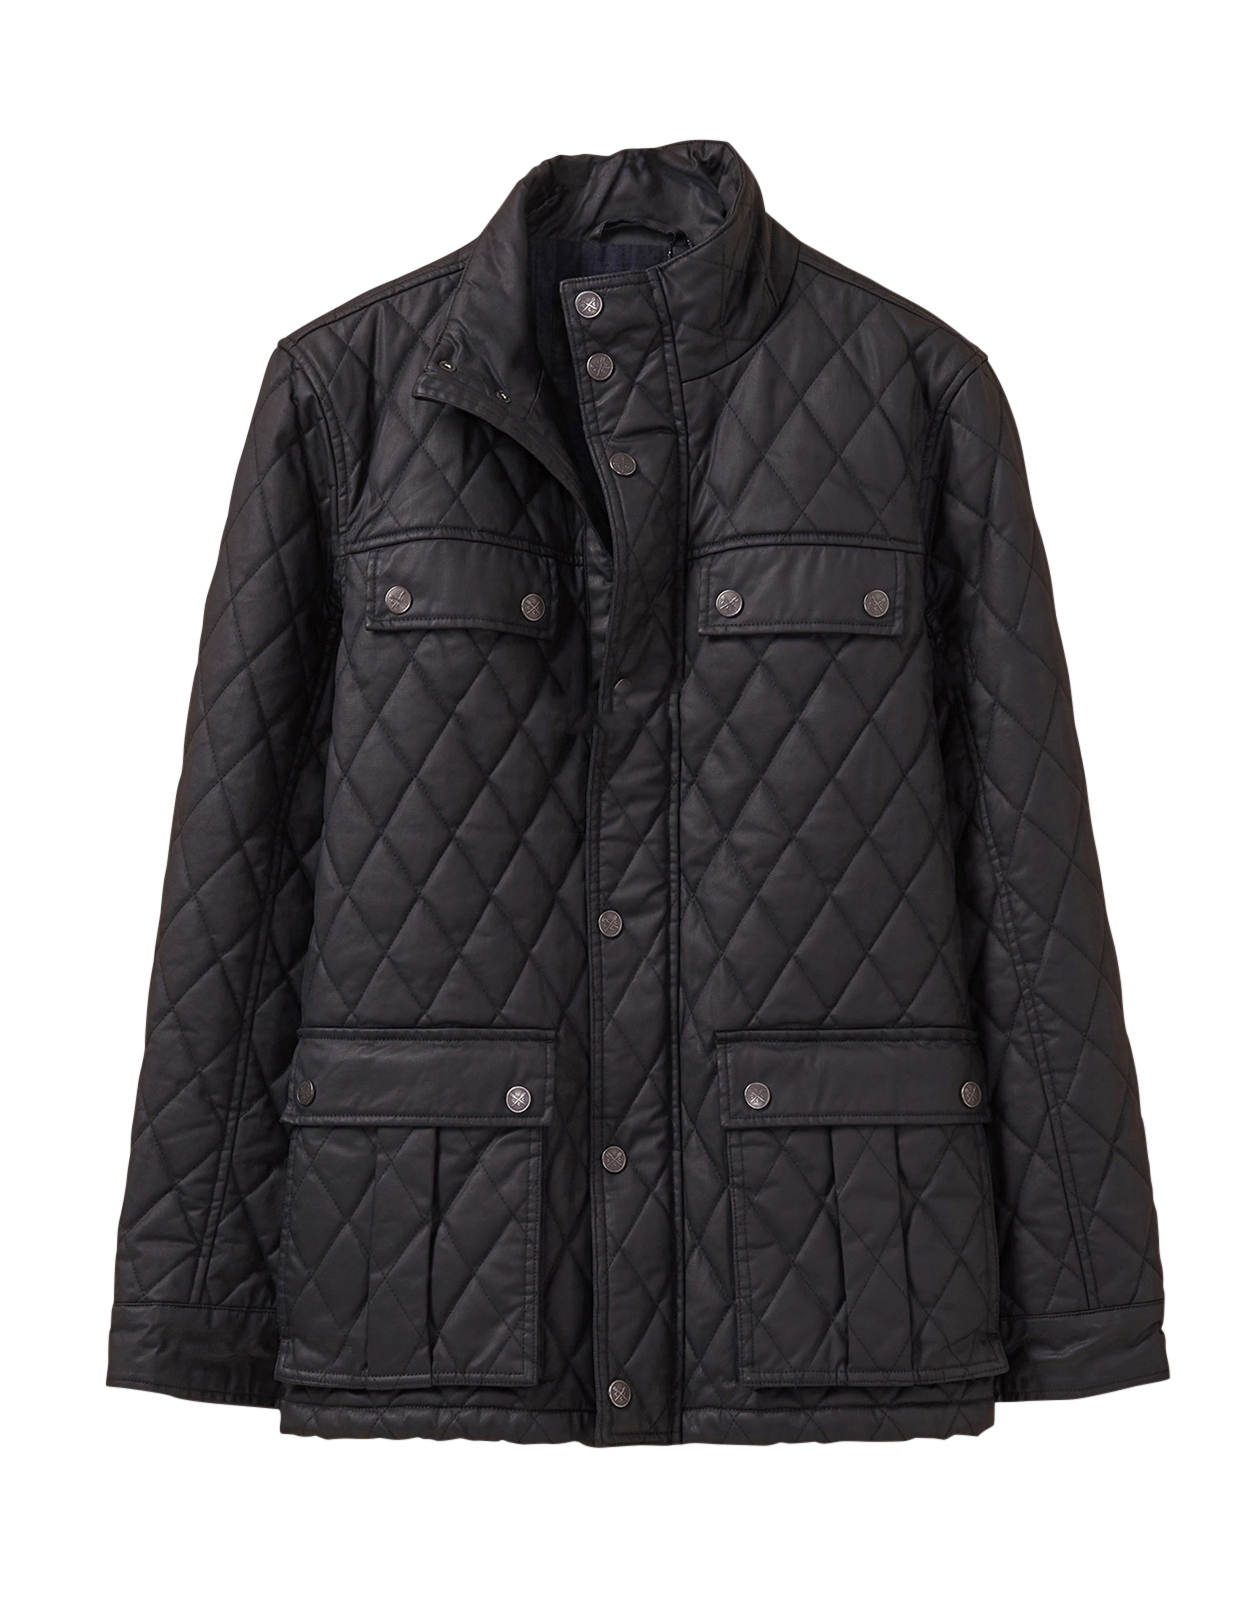 NEW CREW CLOTHING Mens Durleigh Jacket in Black £51.20 - PicClick UK